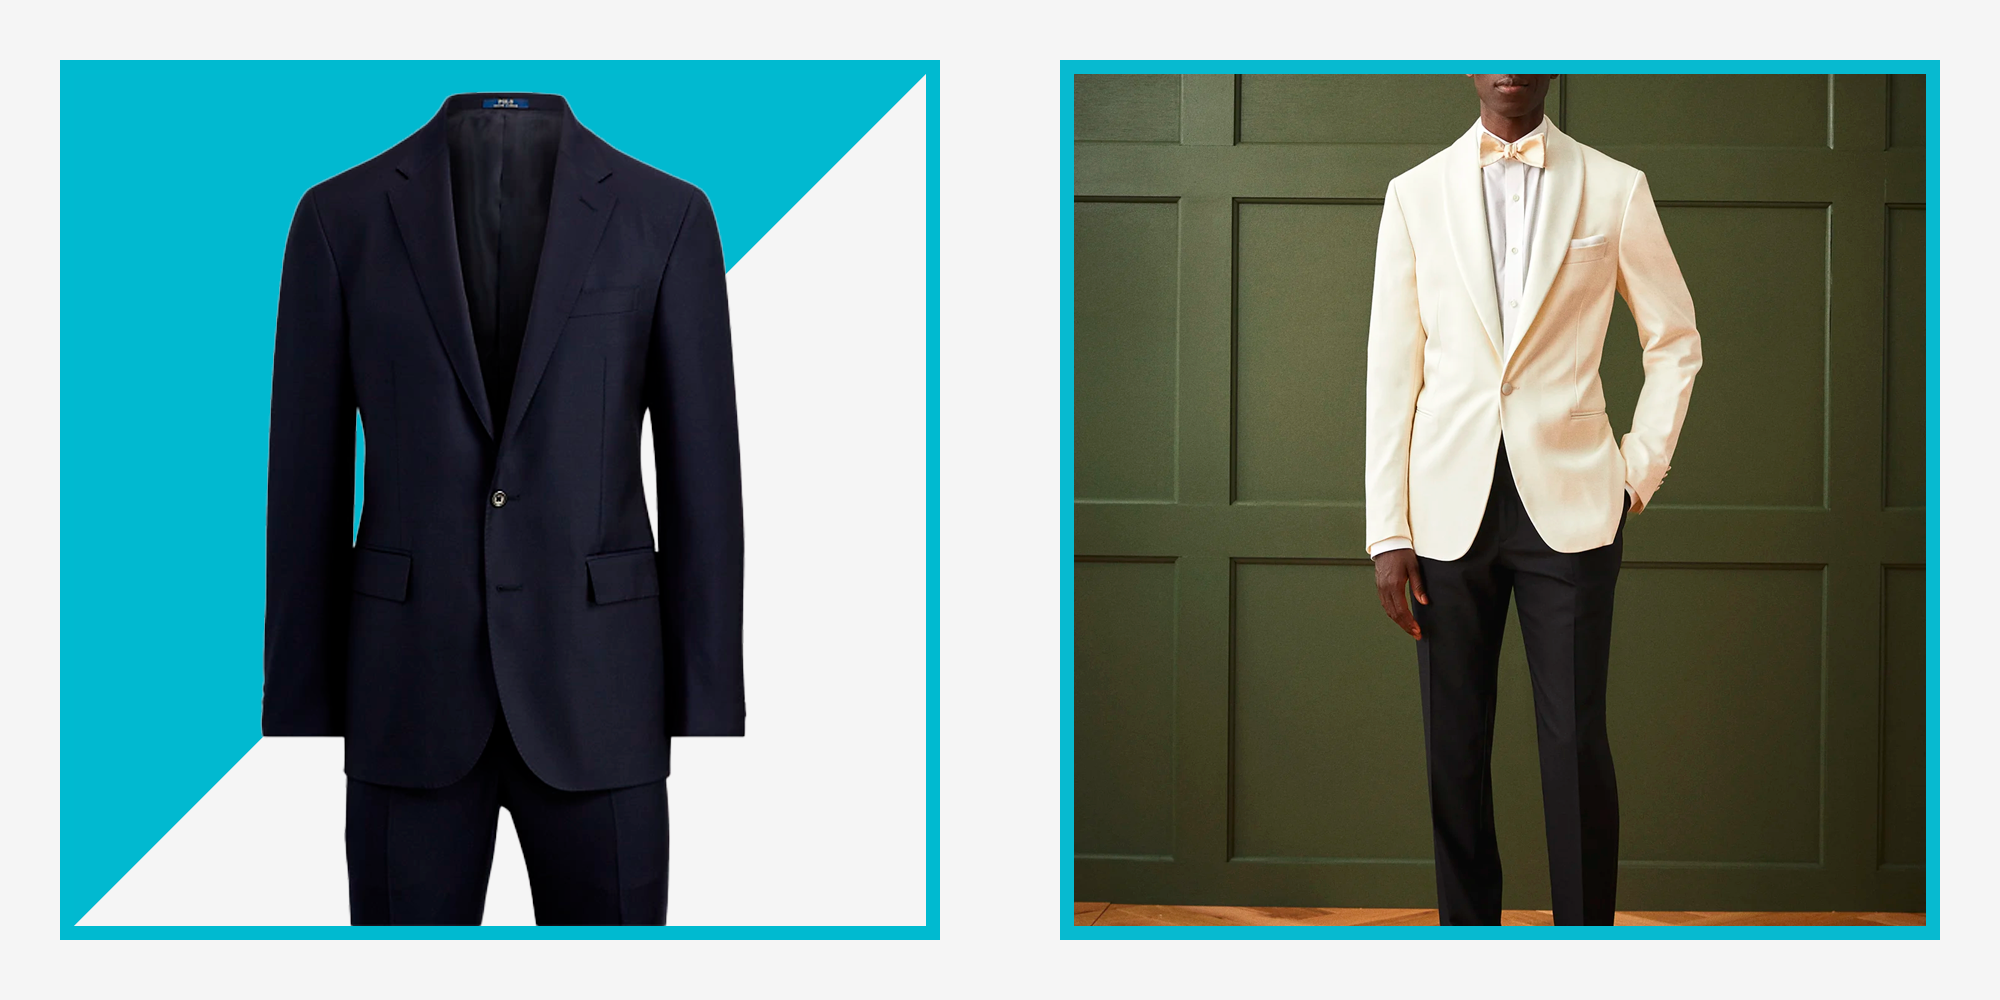 13 Fine Wedding Suits for Every Dress Code